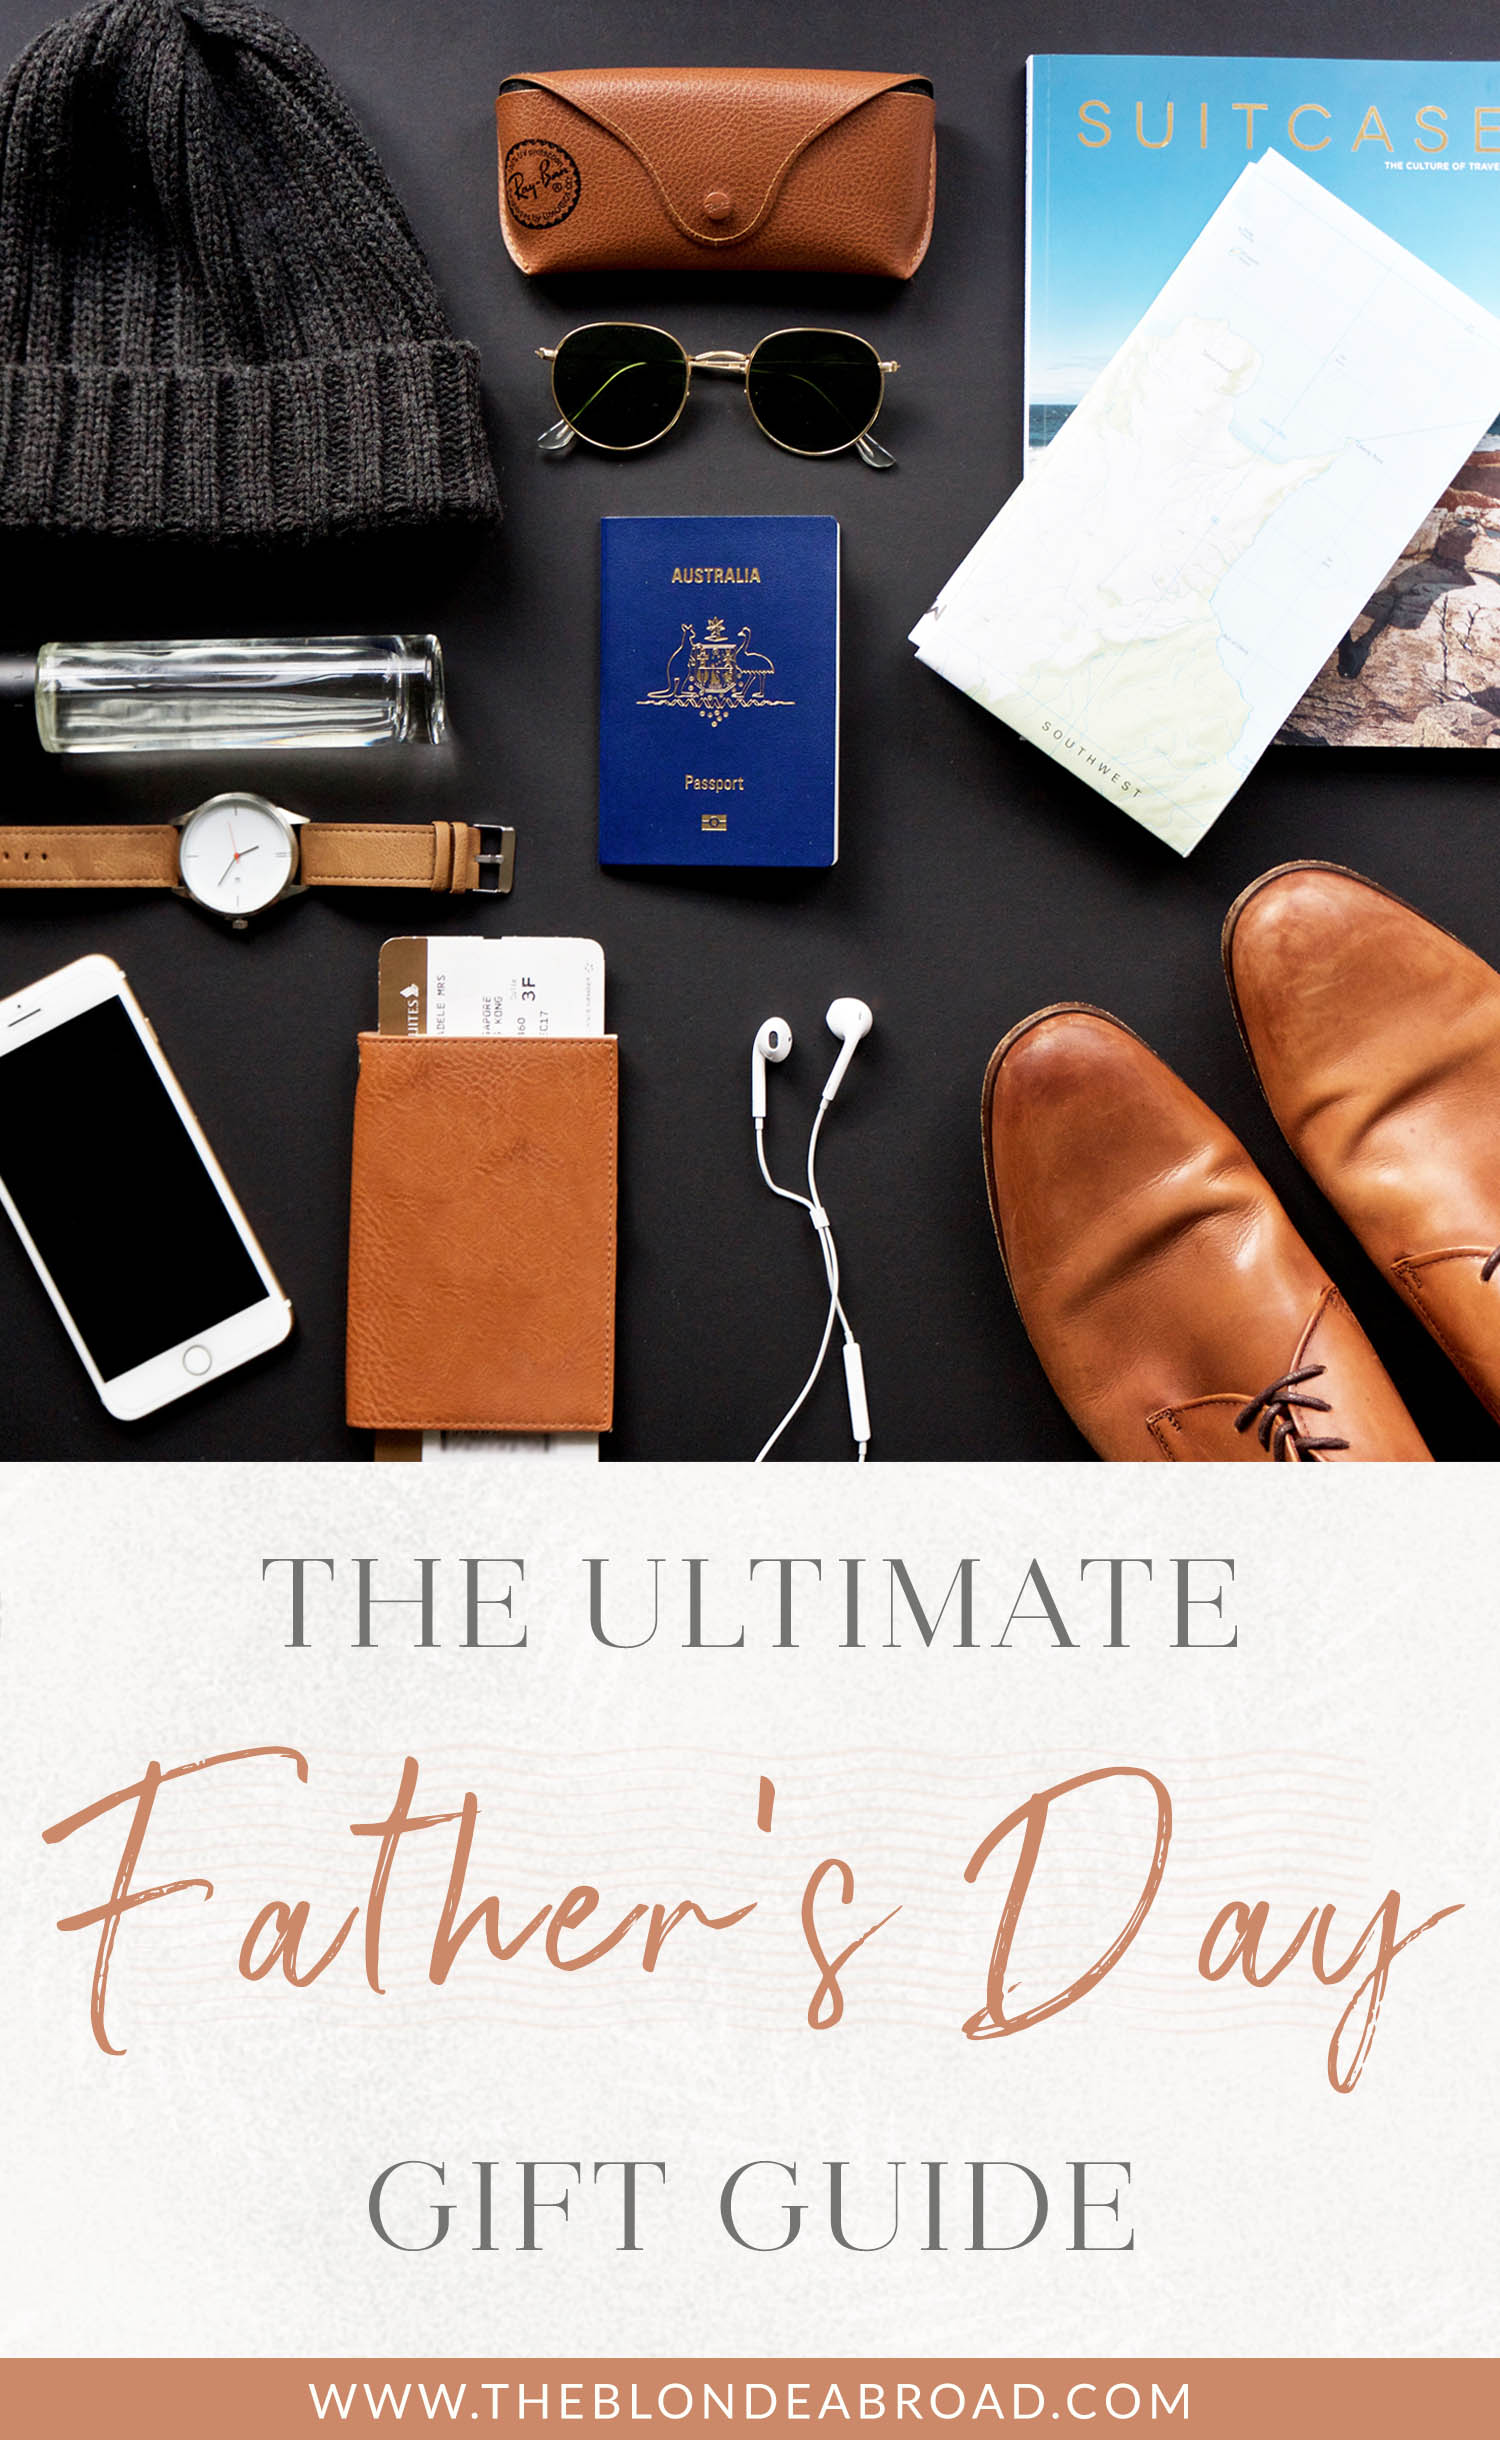 The Ultimate Father's Day Gift Guide • The Blonde Abroad